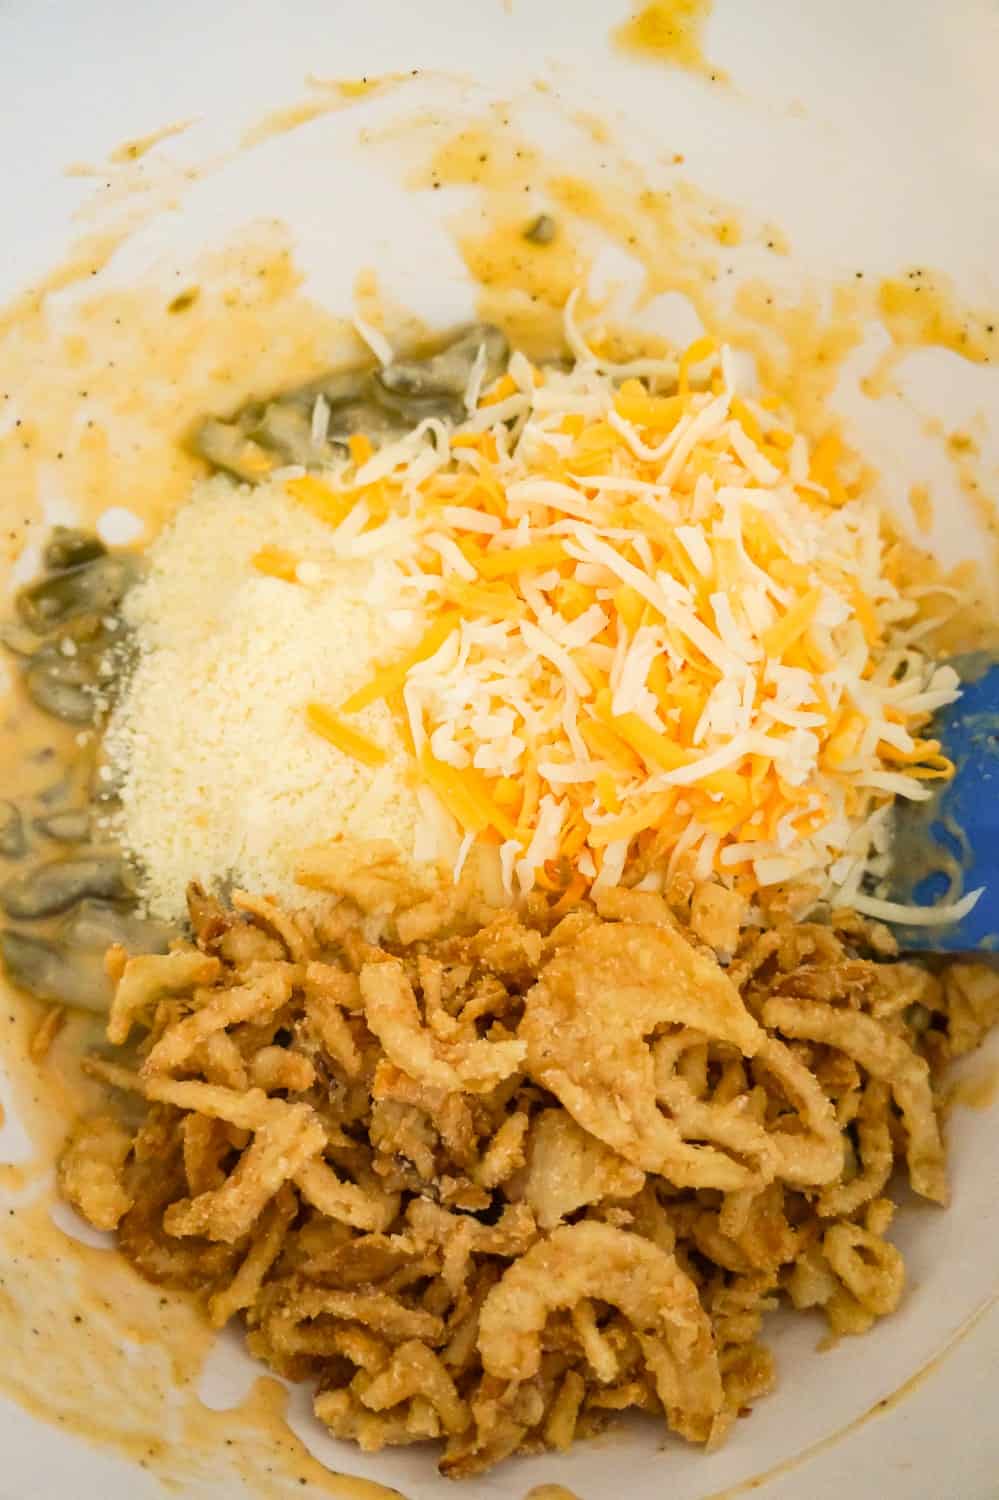 shredded Parmesan, mozzarella, cheddar and French's fried onions on top of green bean mixture in a mixing bowl